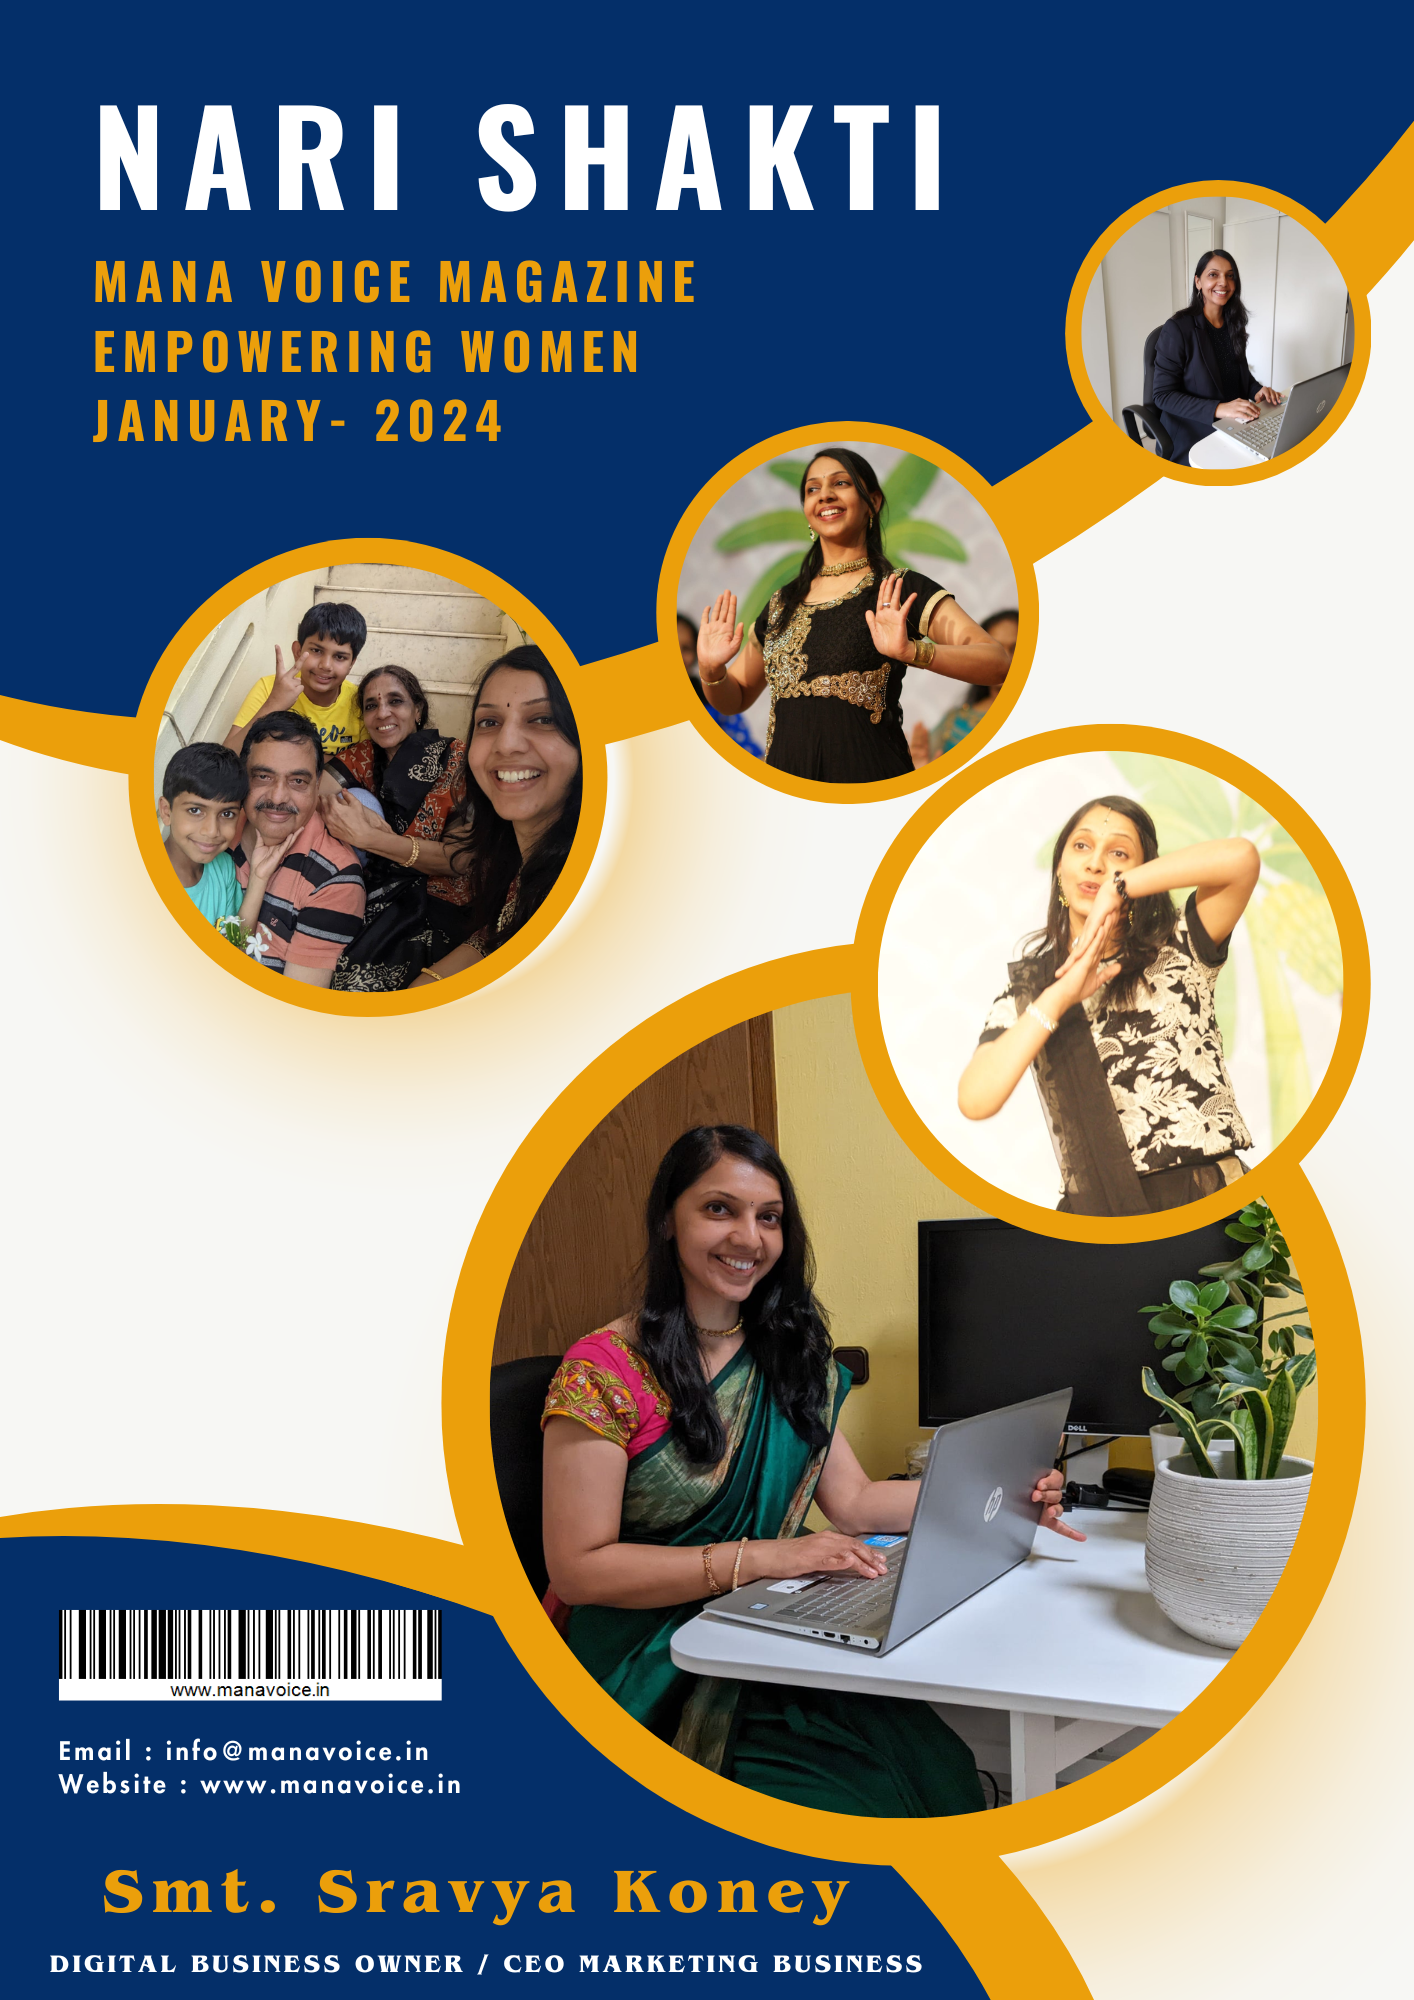 Indian Woman establishes herself as a Successful Entrepreneur in Germany even after having many challenges in her way | Nari Shakti - Empowering Women | Mana Voice